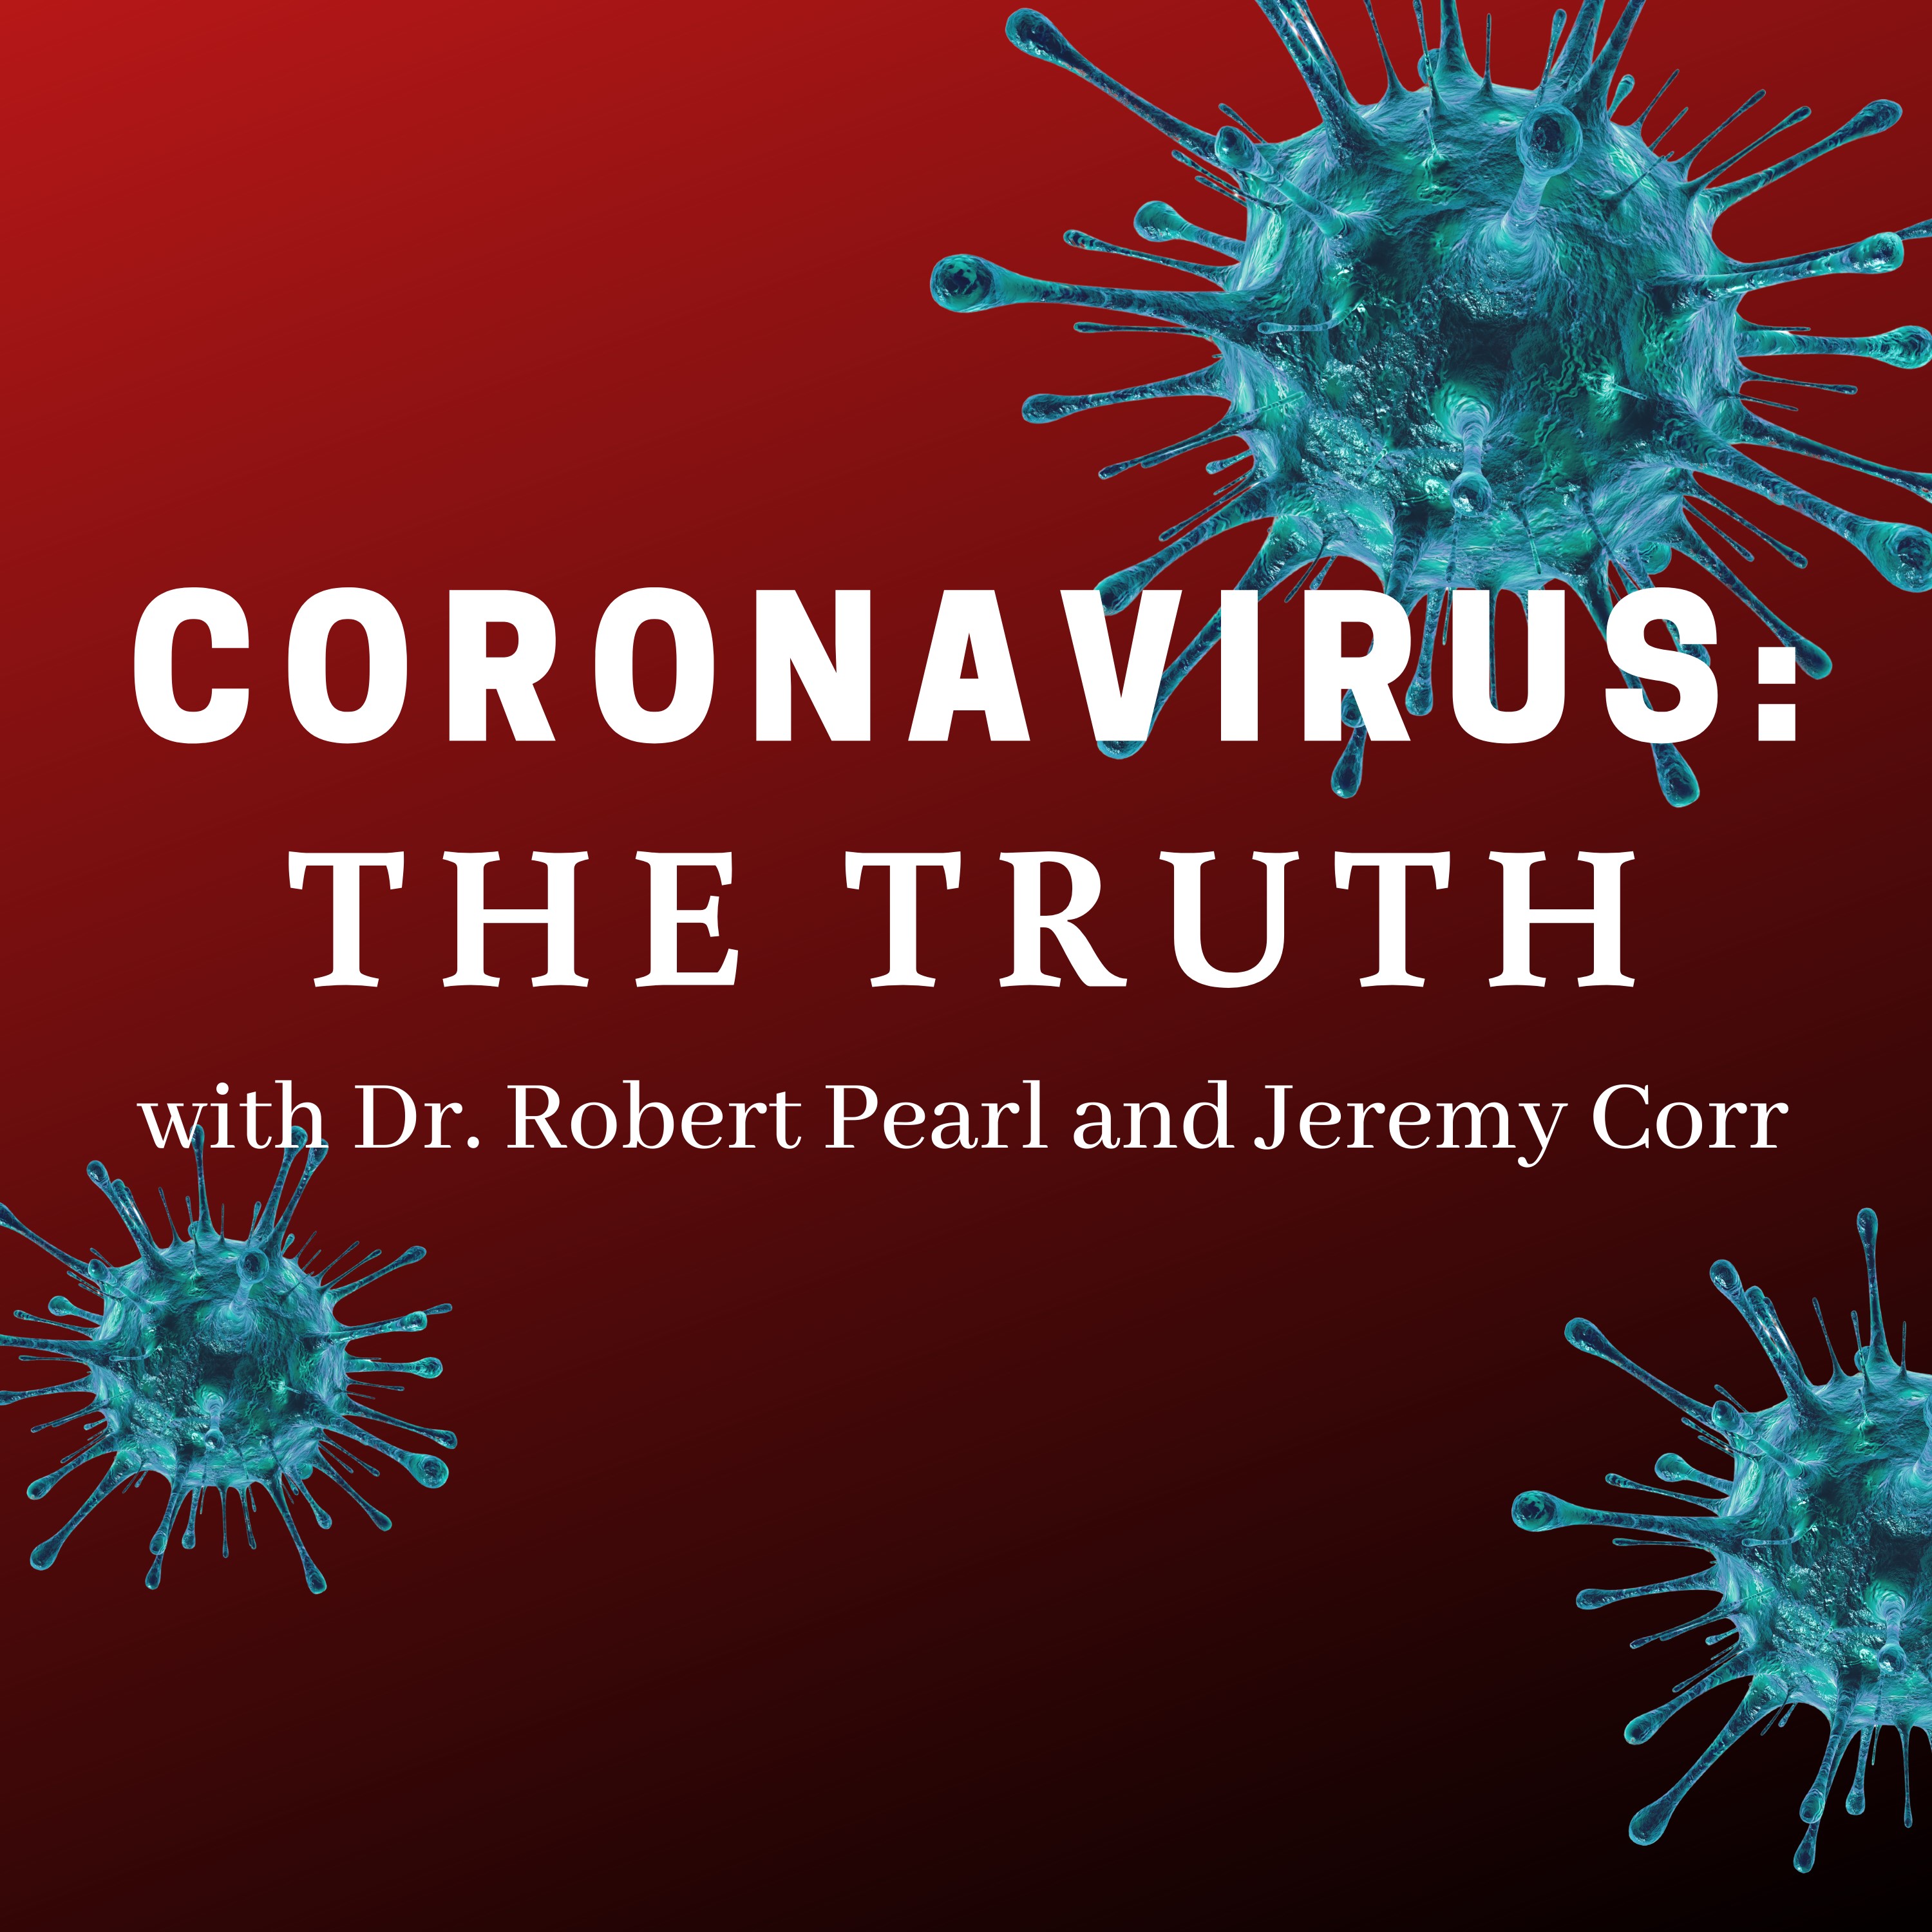 Coronavirus: The Truth with Dr. Robert Pearl and Jeremy Corr